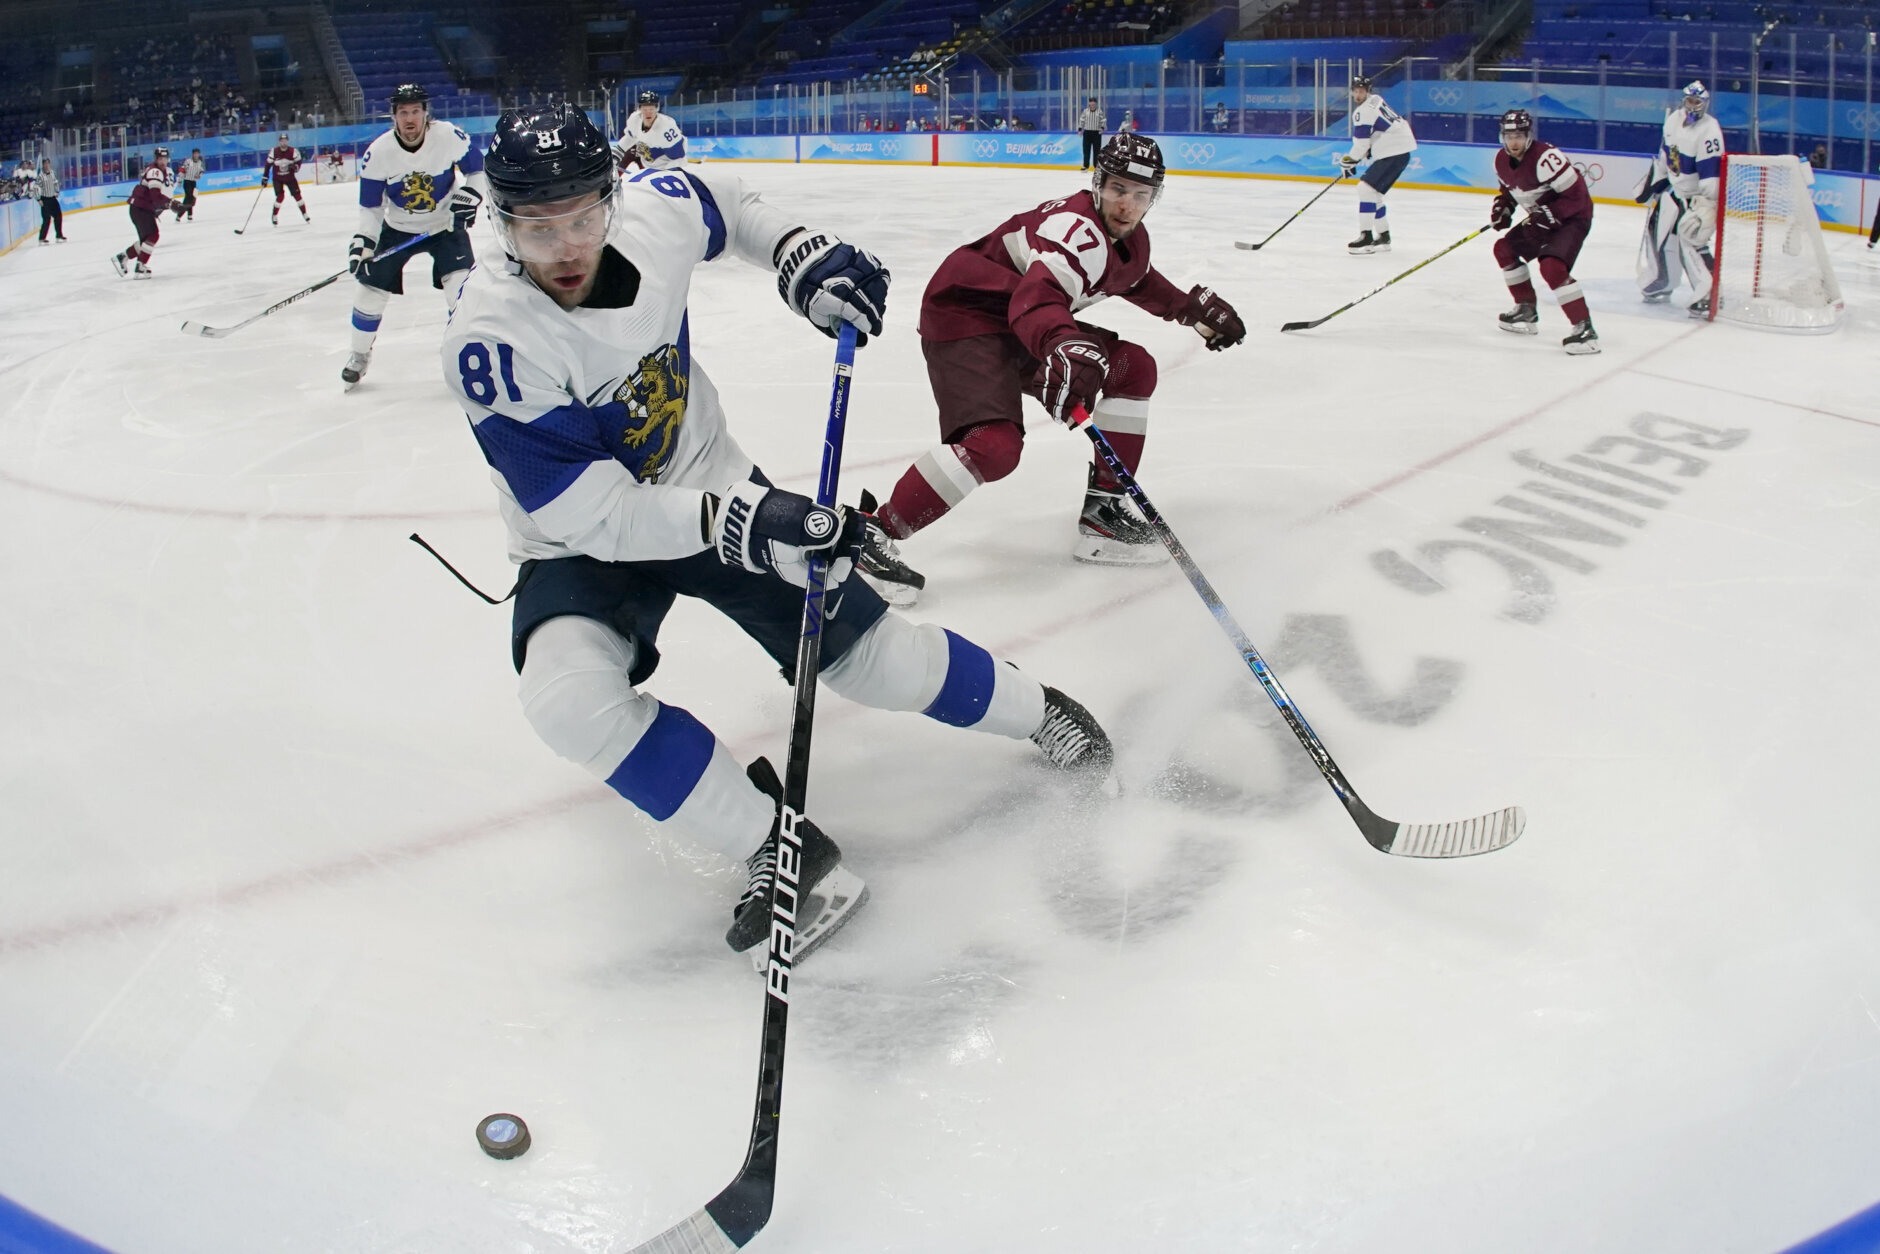 <p>Finland&#8217;s Iiro Pakarinen (81) beats Latvia&#8217;s Martins Dzierkals (17) to the puck during a preliminary round men&#8217;s hockey game at the 2022 Winter Olympics, Friday, Feb. 11, 2022, in Beijing.</p>
